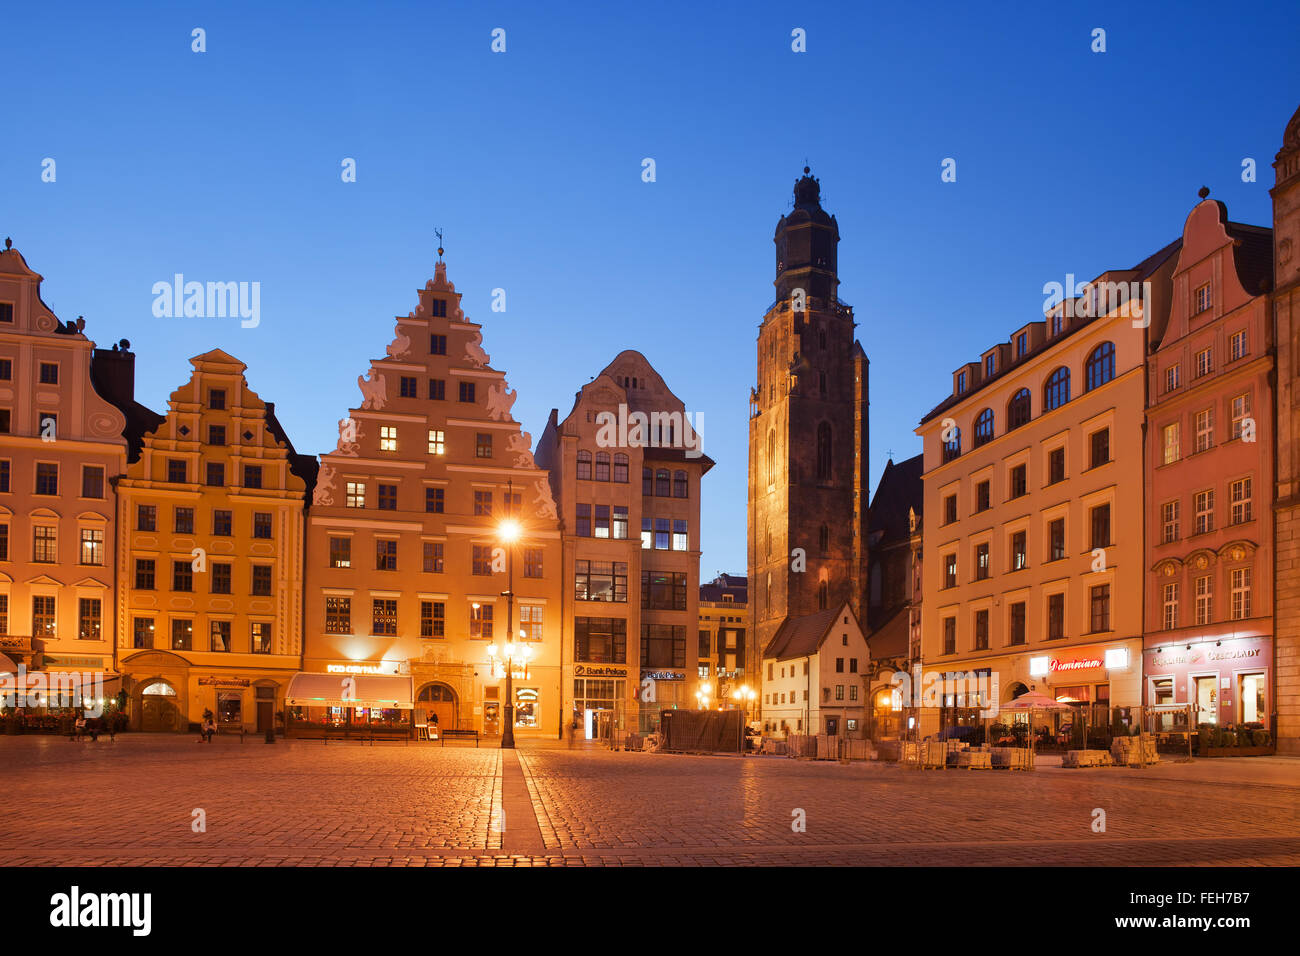 City of Wroclaw in Poland, Old Town skyline at dusk, tower of St. Elizabeth Church, historic tenement houses with gables Stock Photo